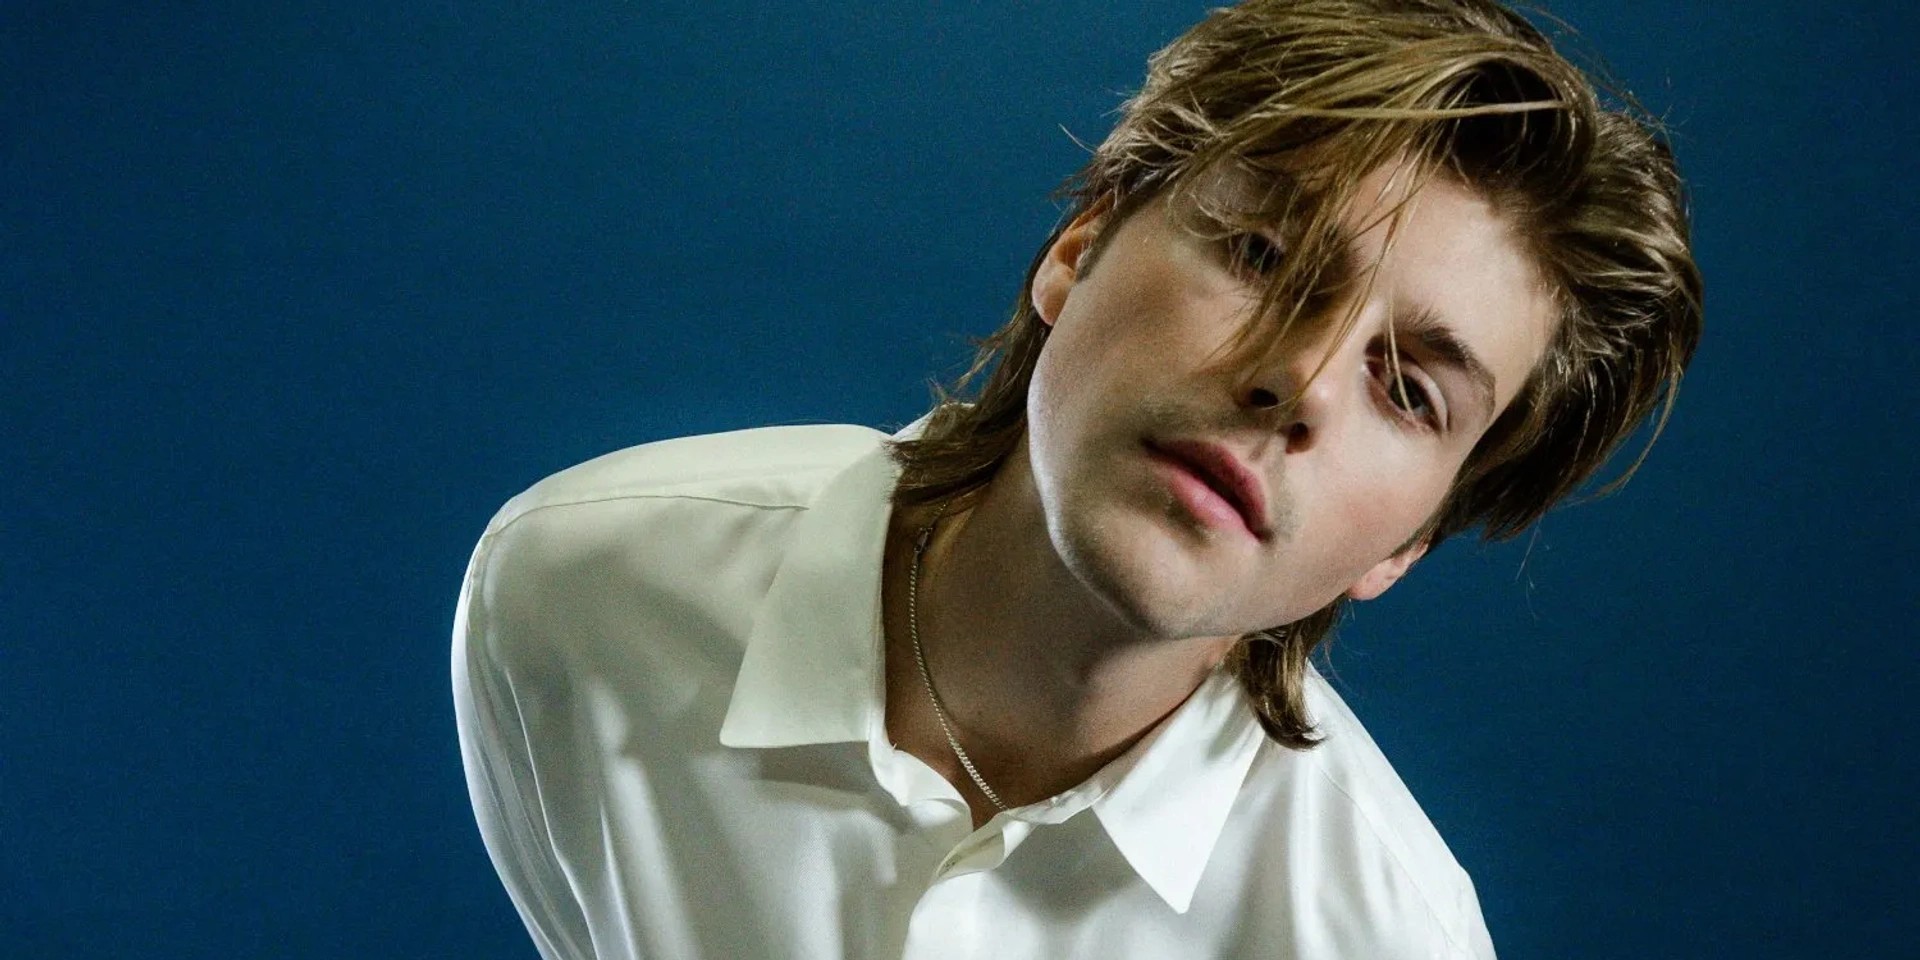 Ruel to perform a free show in Manila this February